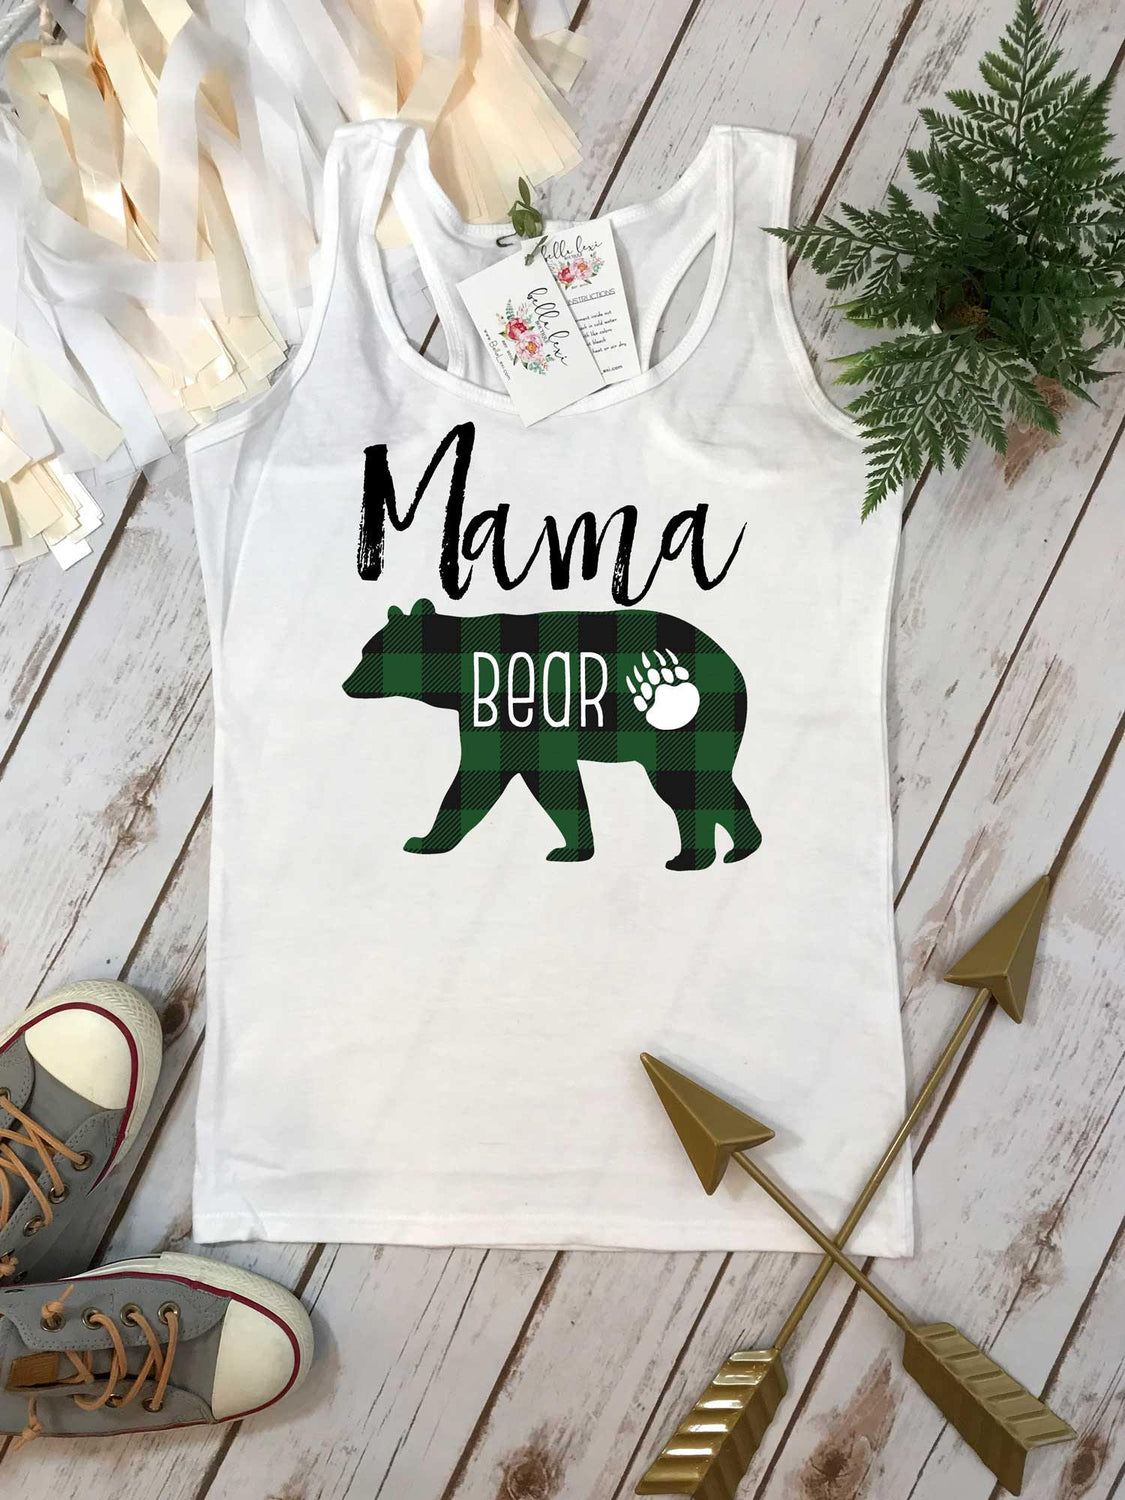 Mama Bear Shirt, Mommy and Me shirts, Mommy and Me Outfits, Buffalo Plaid Shirt, Mom Shirts, Family Outfits, Baby Shower Gift for Mom, Green